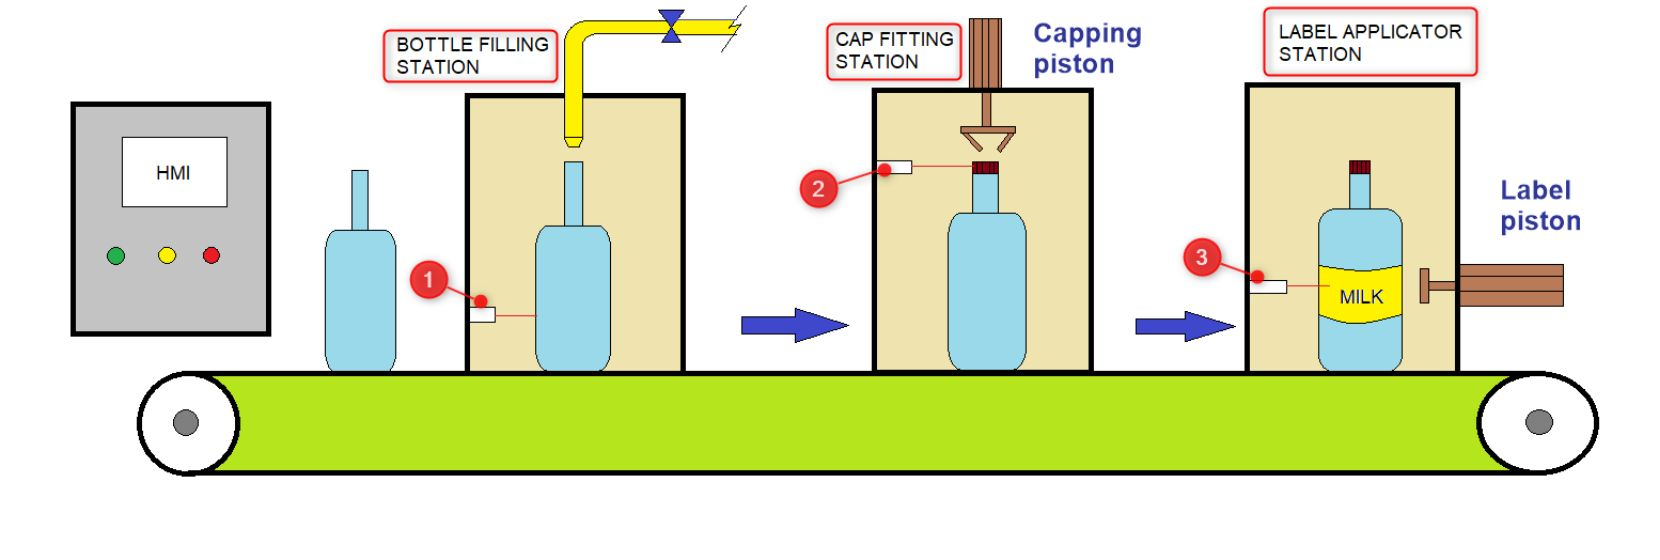 Milk bottle filling and capping application